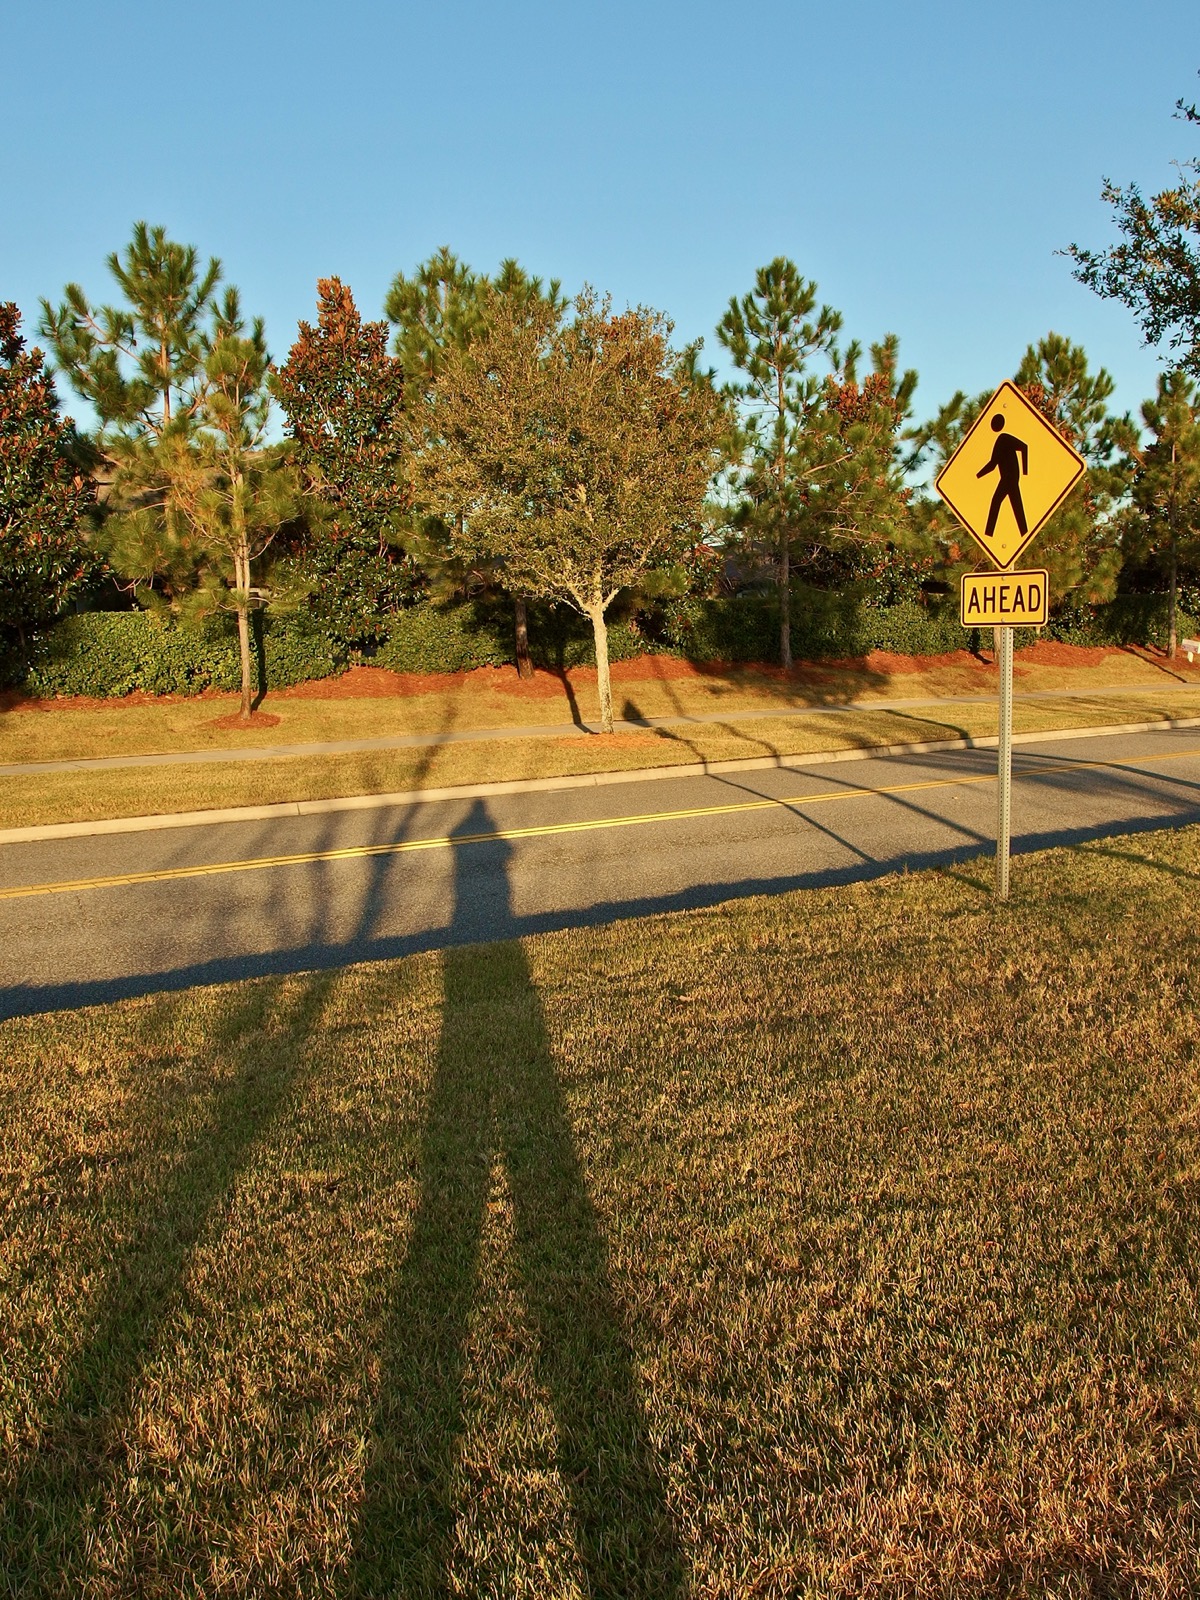 A couple of shadowy figures. The 